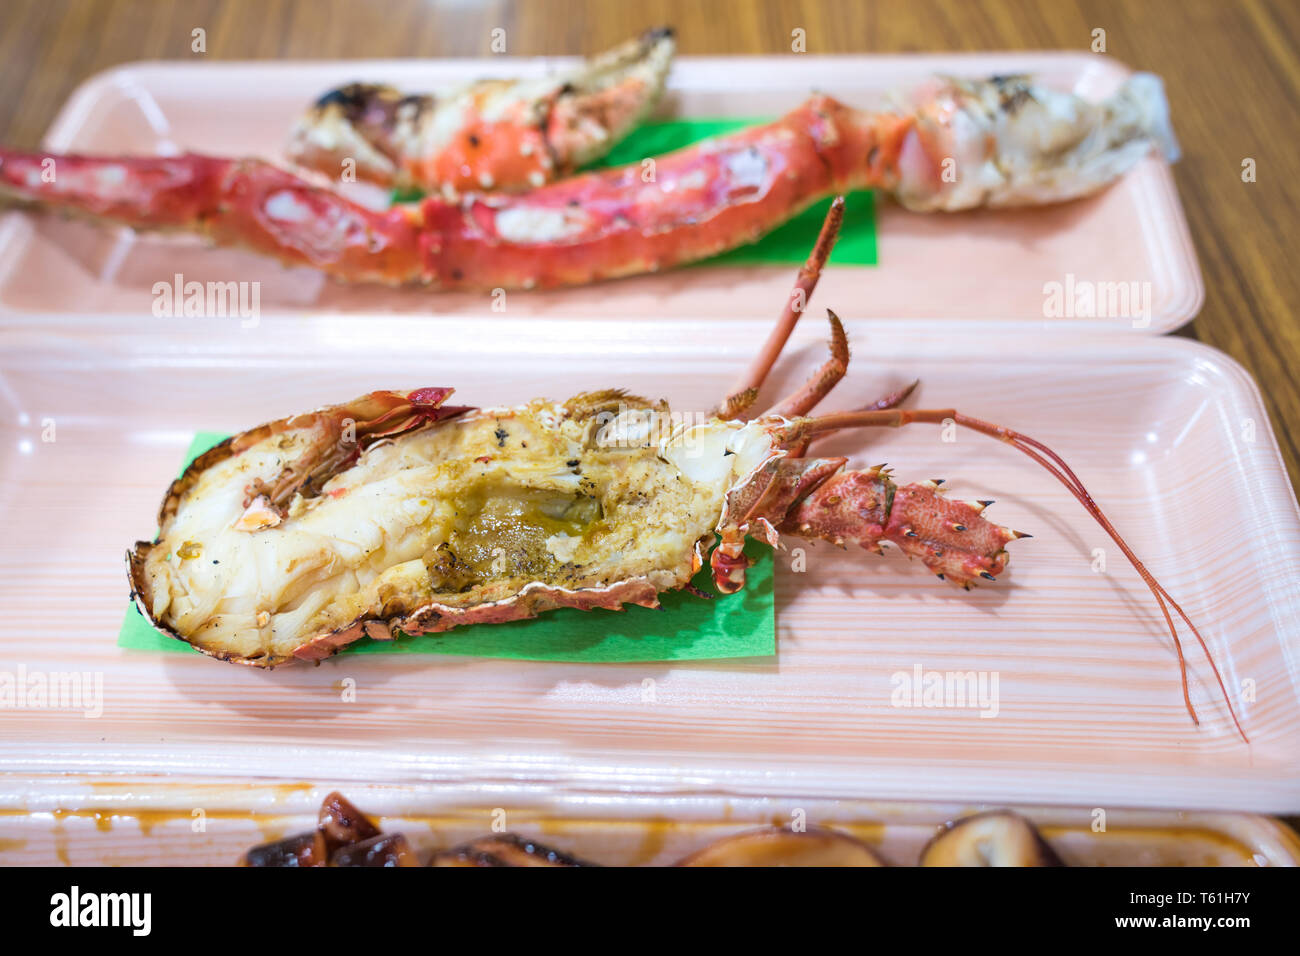 Focus and close up to grilled shrimp in Foam plate on the wood table. Stock Photo